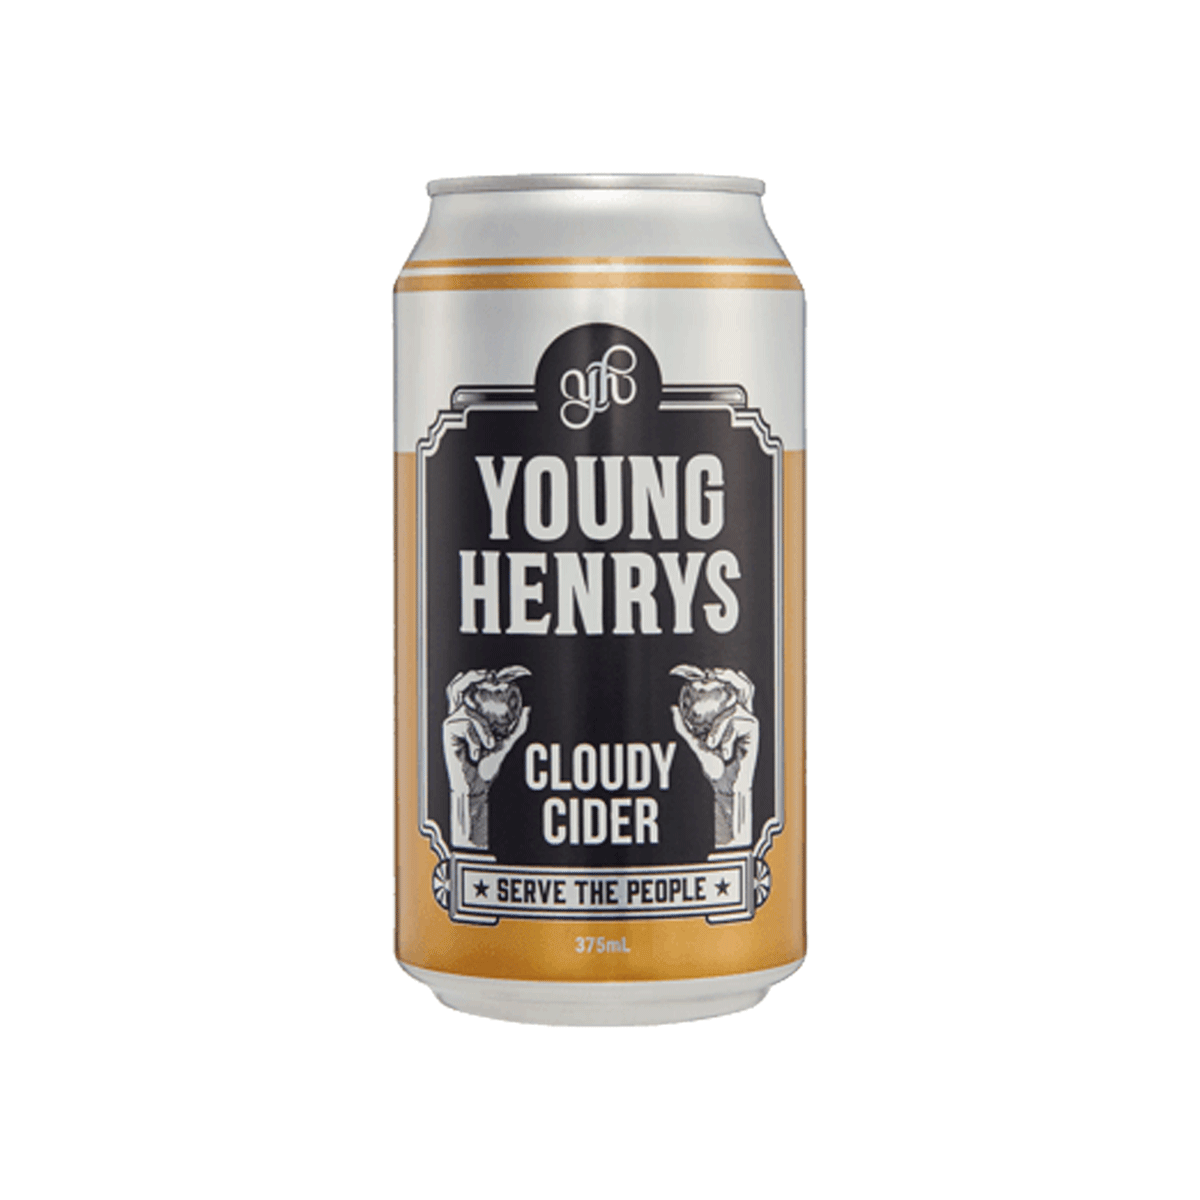 Young Henrys Cloudy Cider Cans